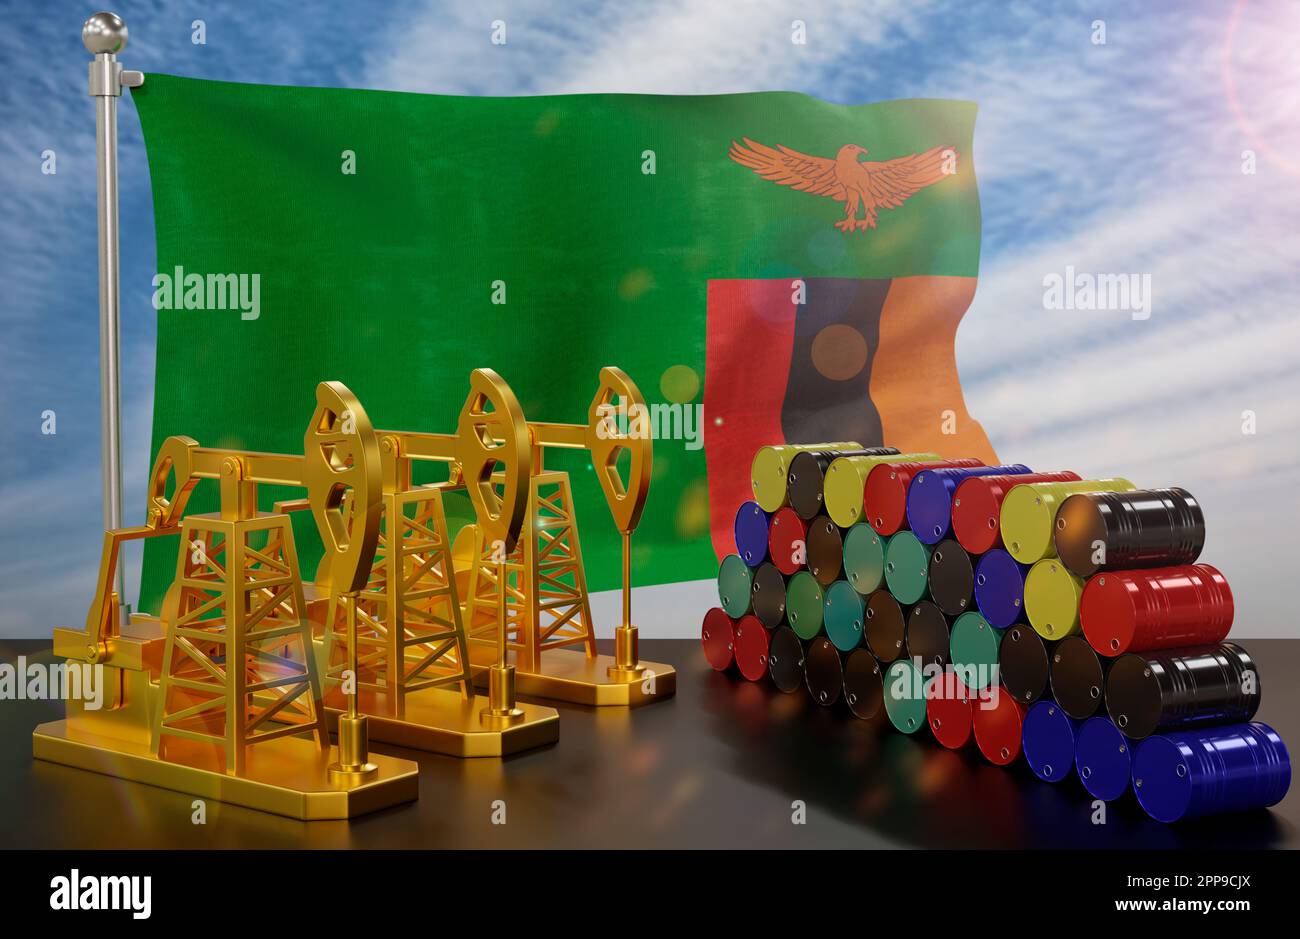 The Zambia's petroleum market. Oil pump made of gold and barrels of metal. The concept of oil production, storage and value. Zambia flag in background Stock Photo